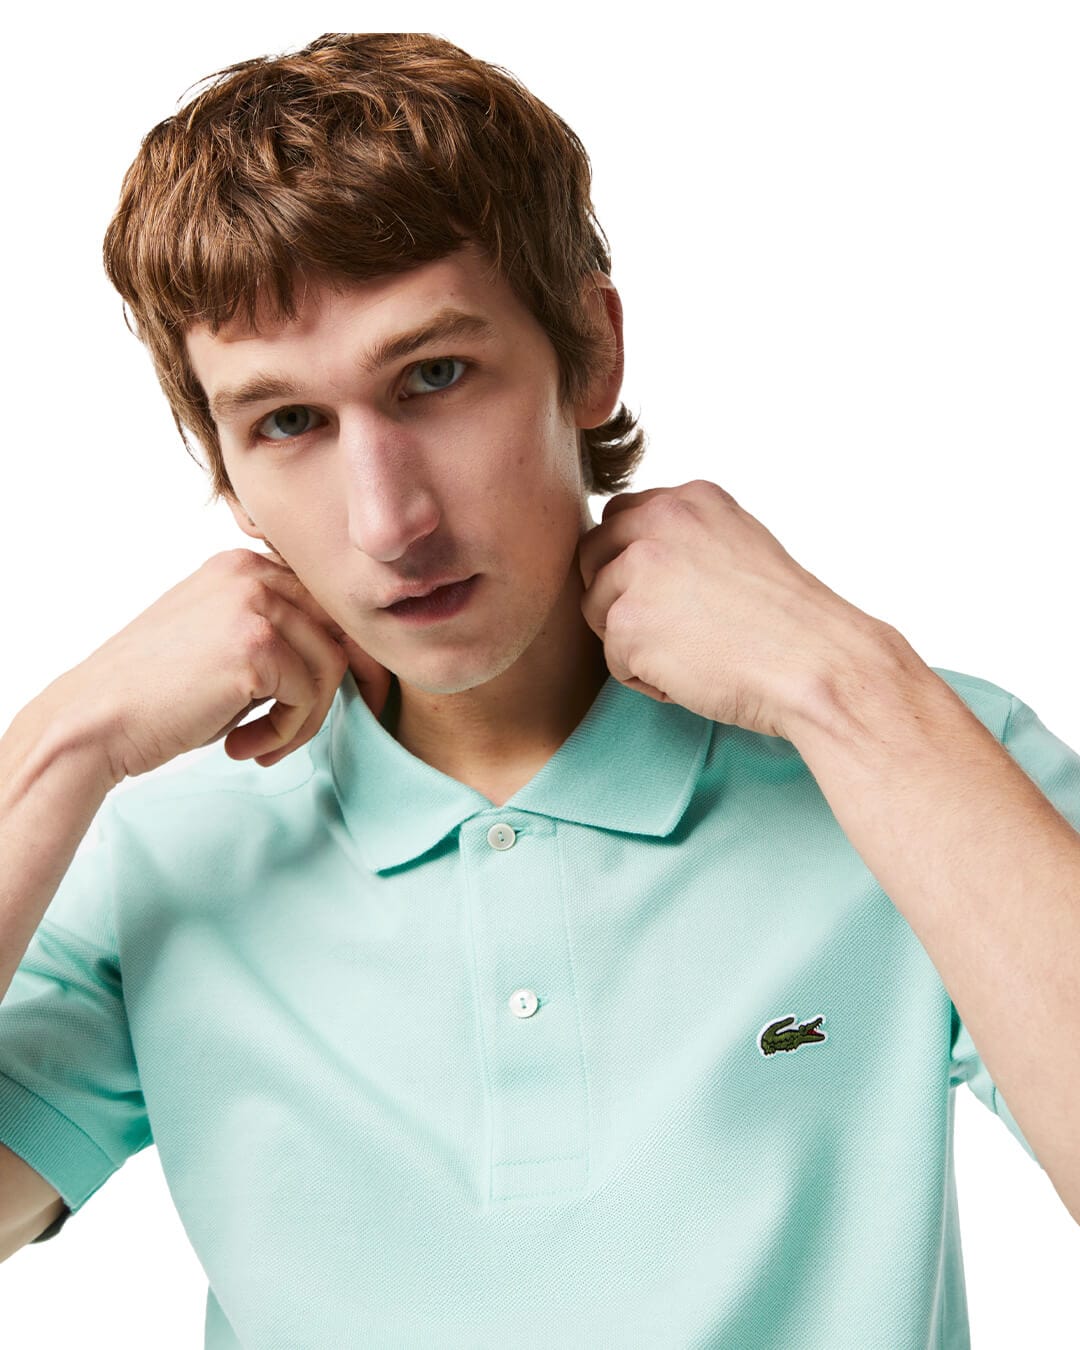 Lacoste Polo Shirts Lacoste Classic Fit L.12.12 Green Polo Shirt